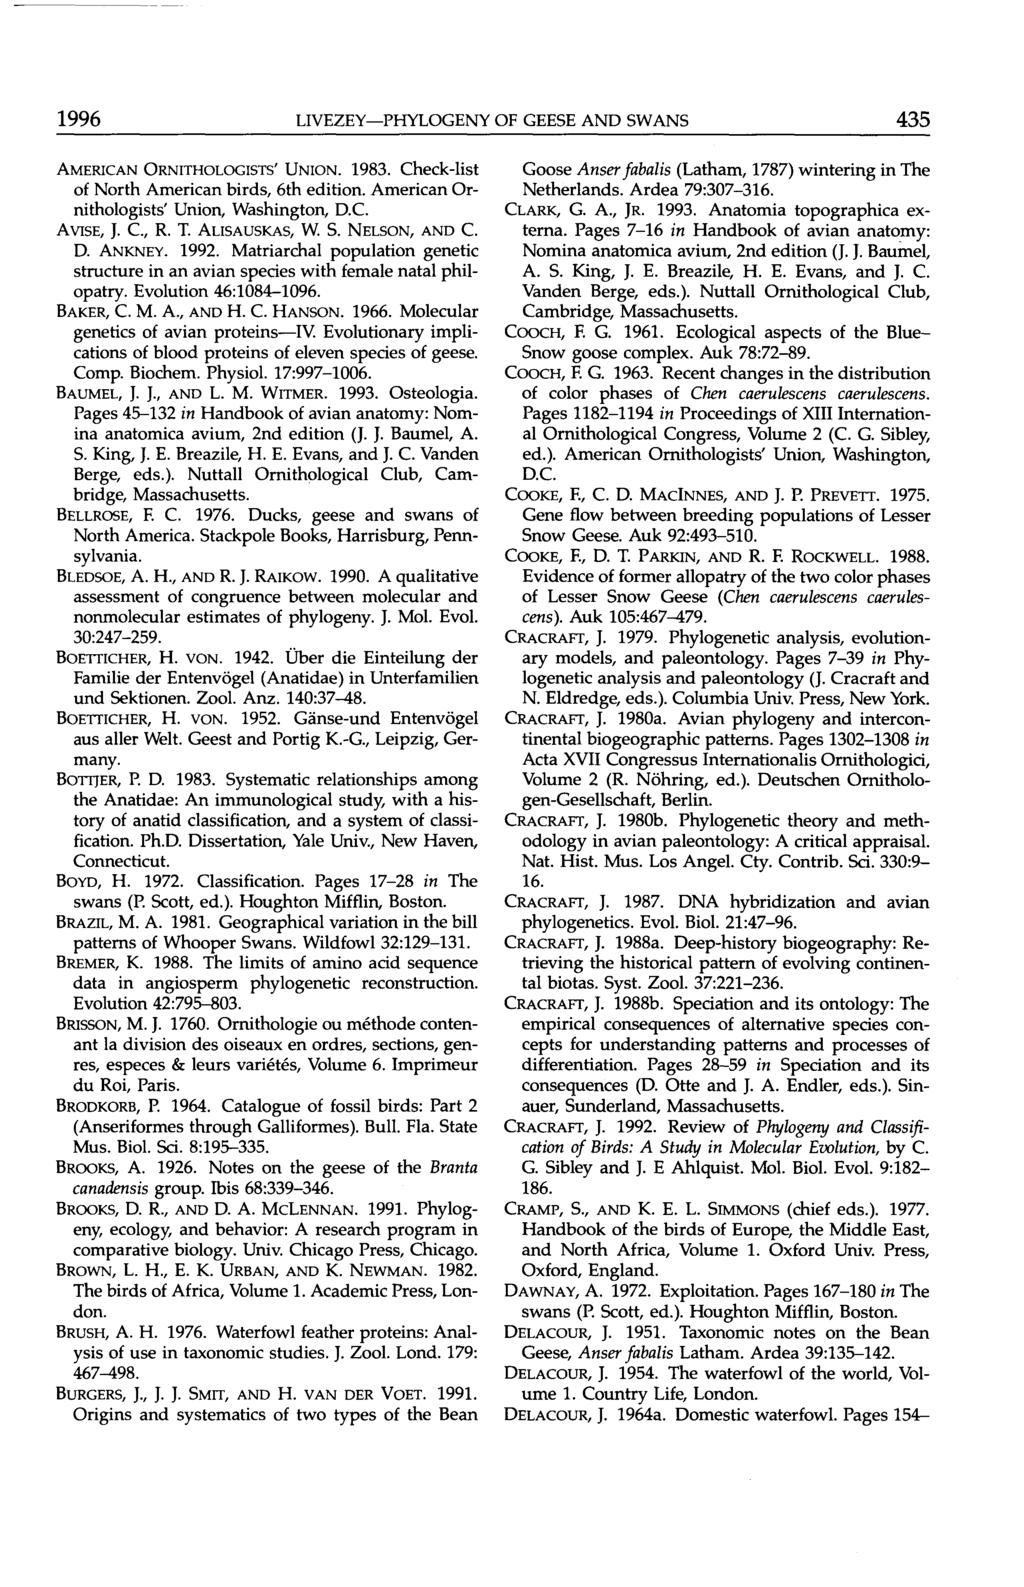 1996 LIVEZEY PHYLOGENY OF GEESE AND SWANS 435 AMERICAN ORNITHOLOGISTS' UNION. 1983. Check-list of North American birds, 6th edition. American Ornithologists' Union, Washington, D.C. AVISE, J. C, R. T.